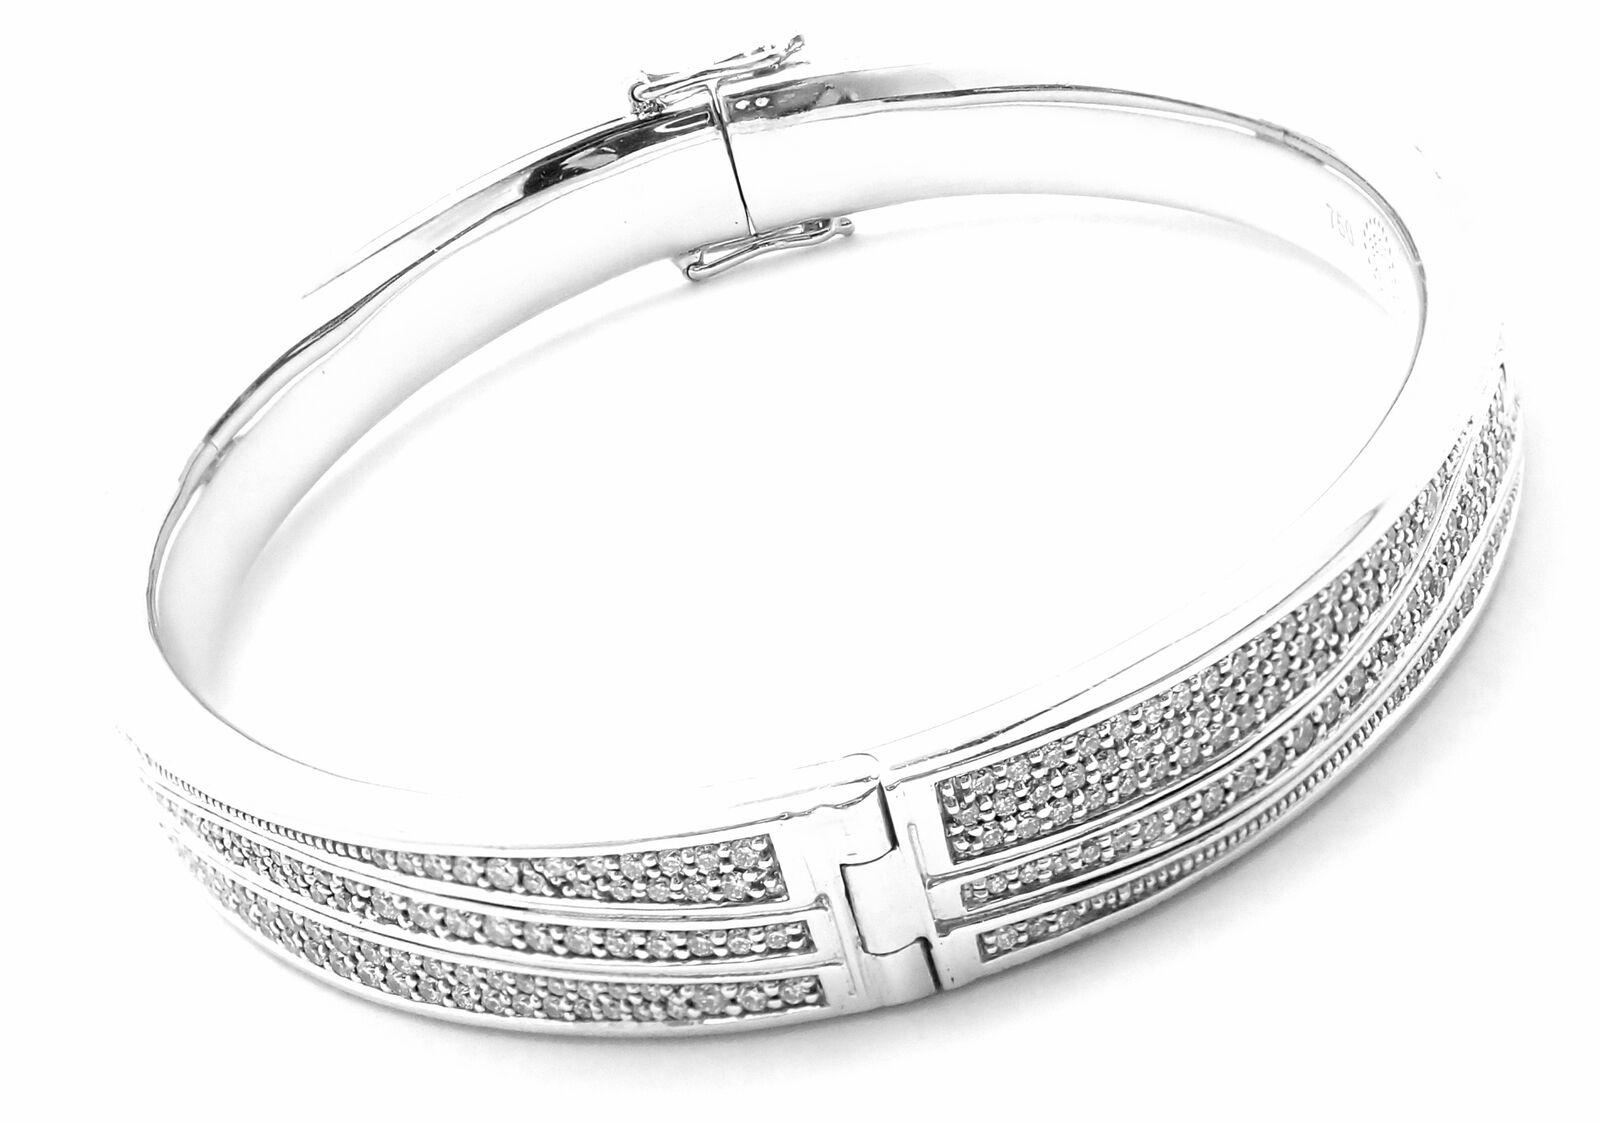 Georg Jensen Fusion Pave Diamond White Gold Bangle Bracelet In Excellent Condition For Sale In Holland, PA